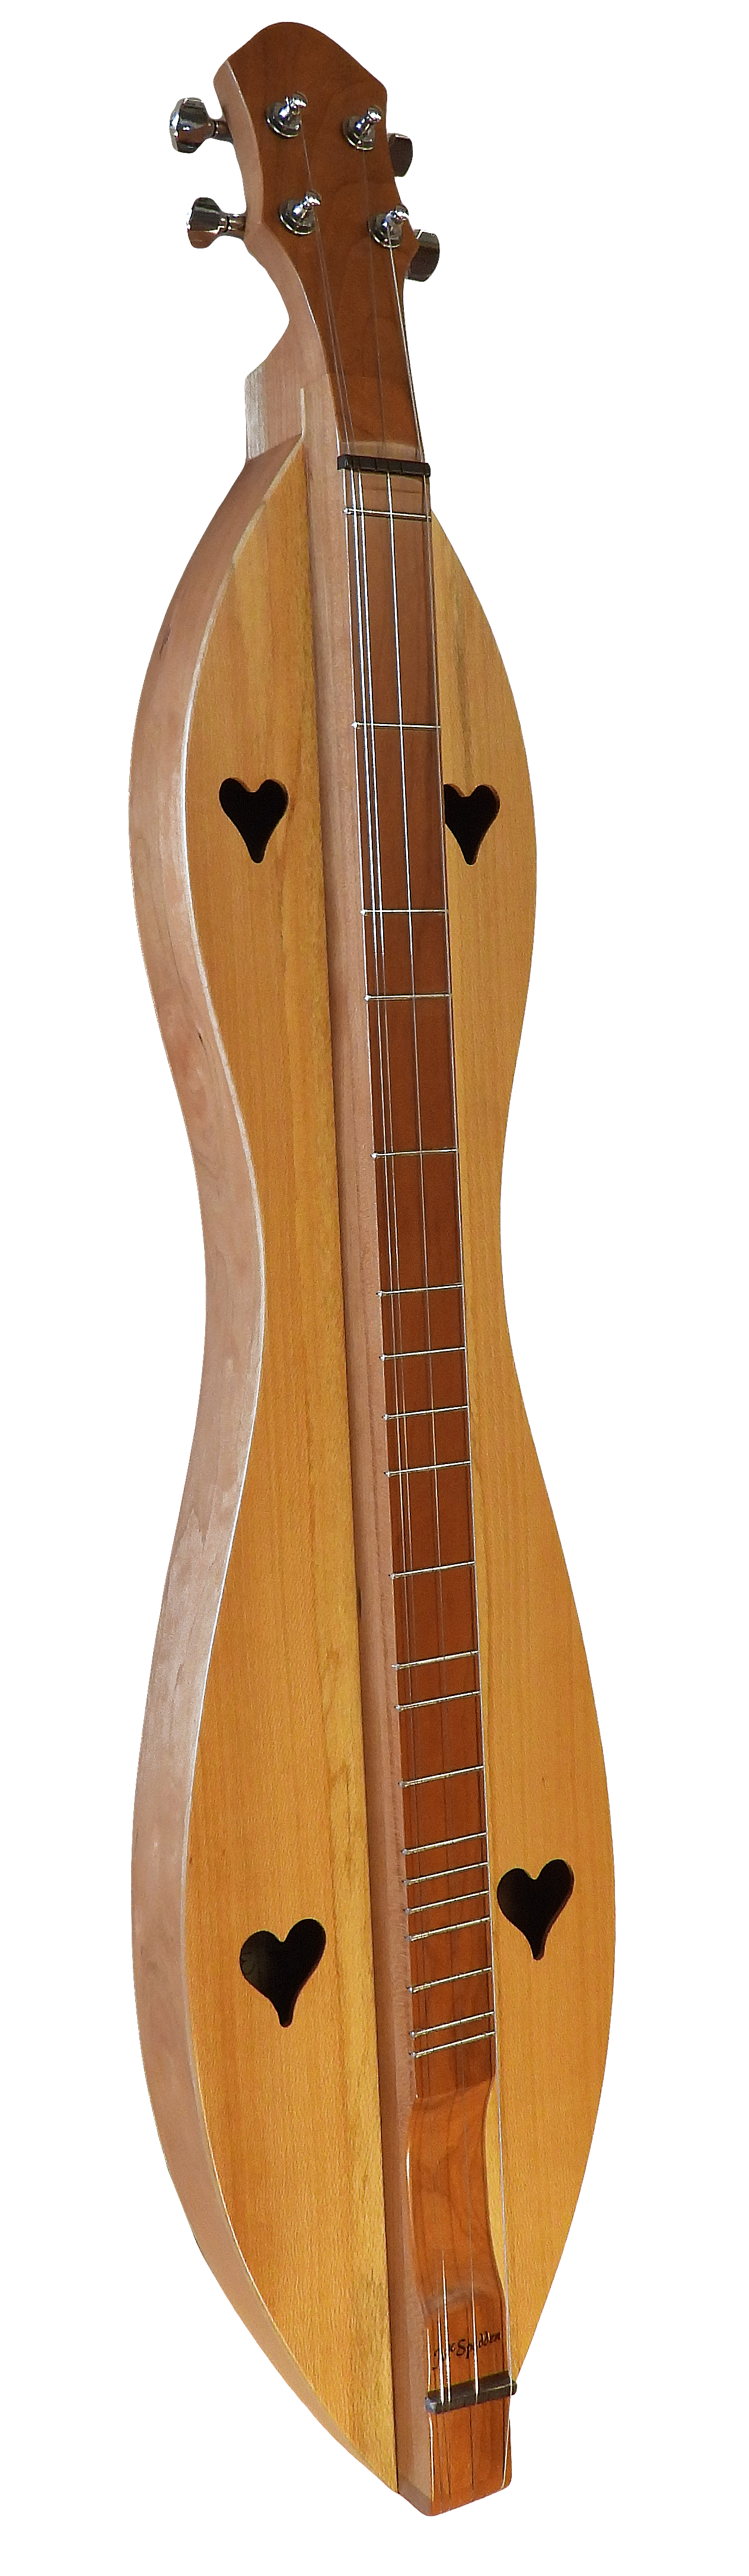 A customizable 4 String, Flathead, Hourglass with Cherry back, sides and Spalted, Clear, or Quartersawn Sycamore top (4FH26CSY) Dulcimer with a lifetime warranty and wooden body adorned with black wings.